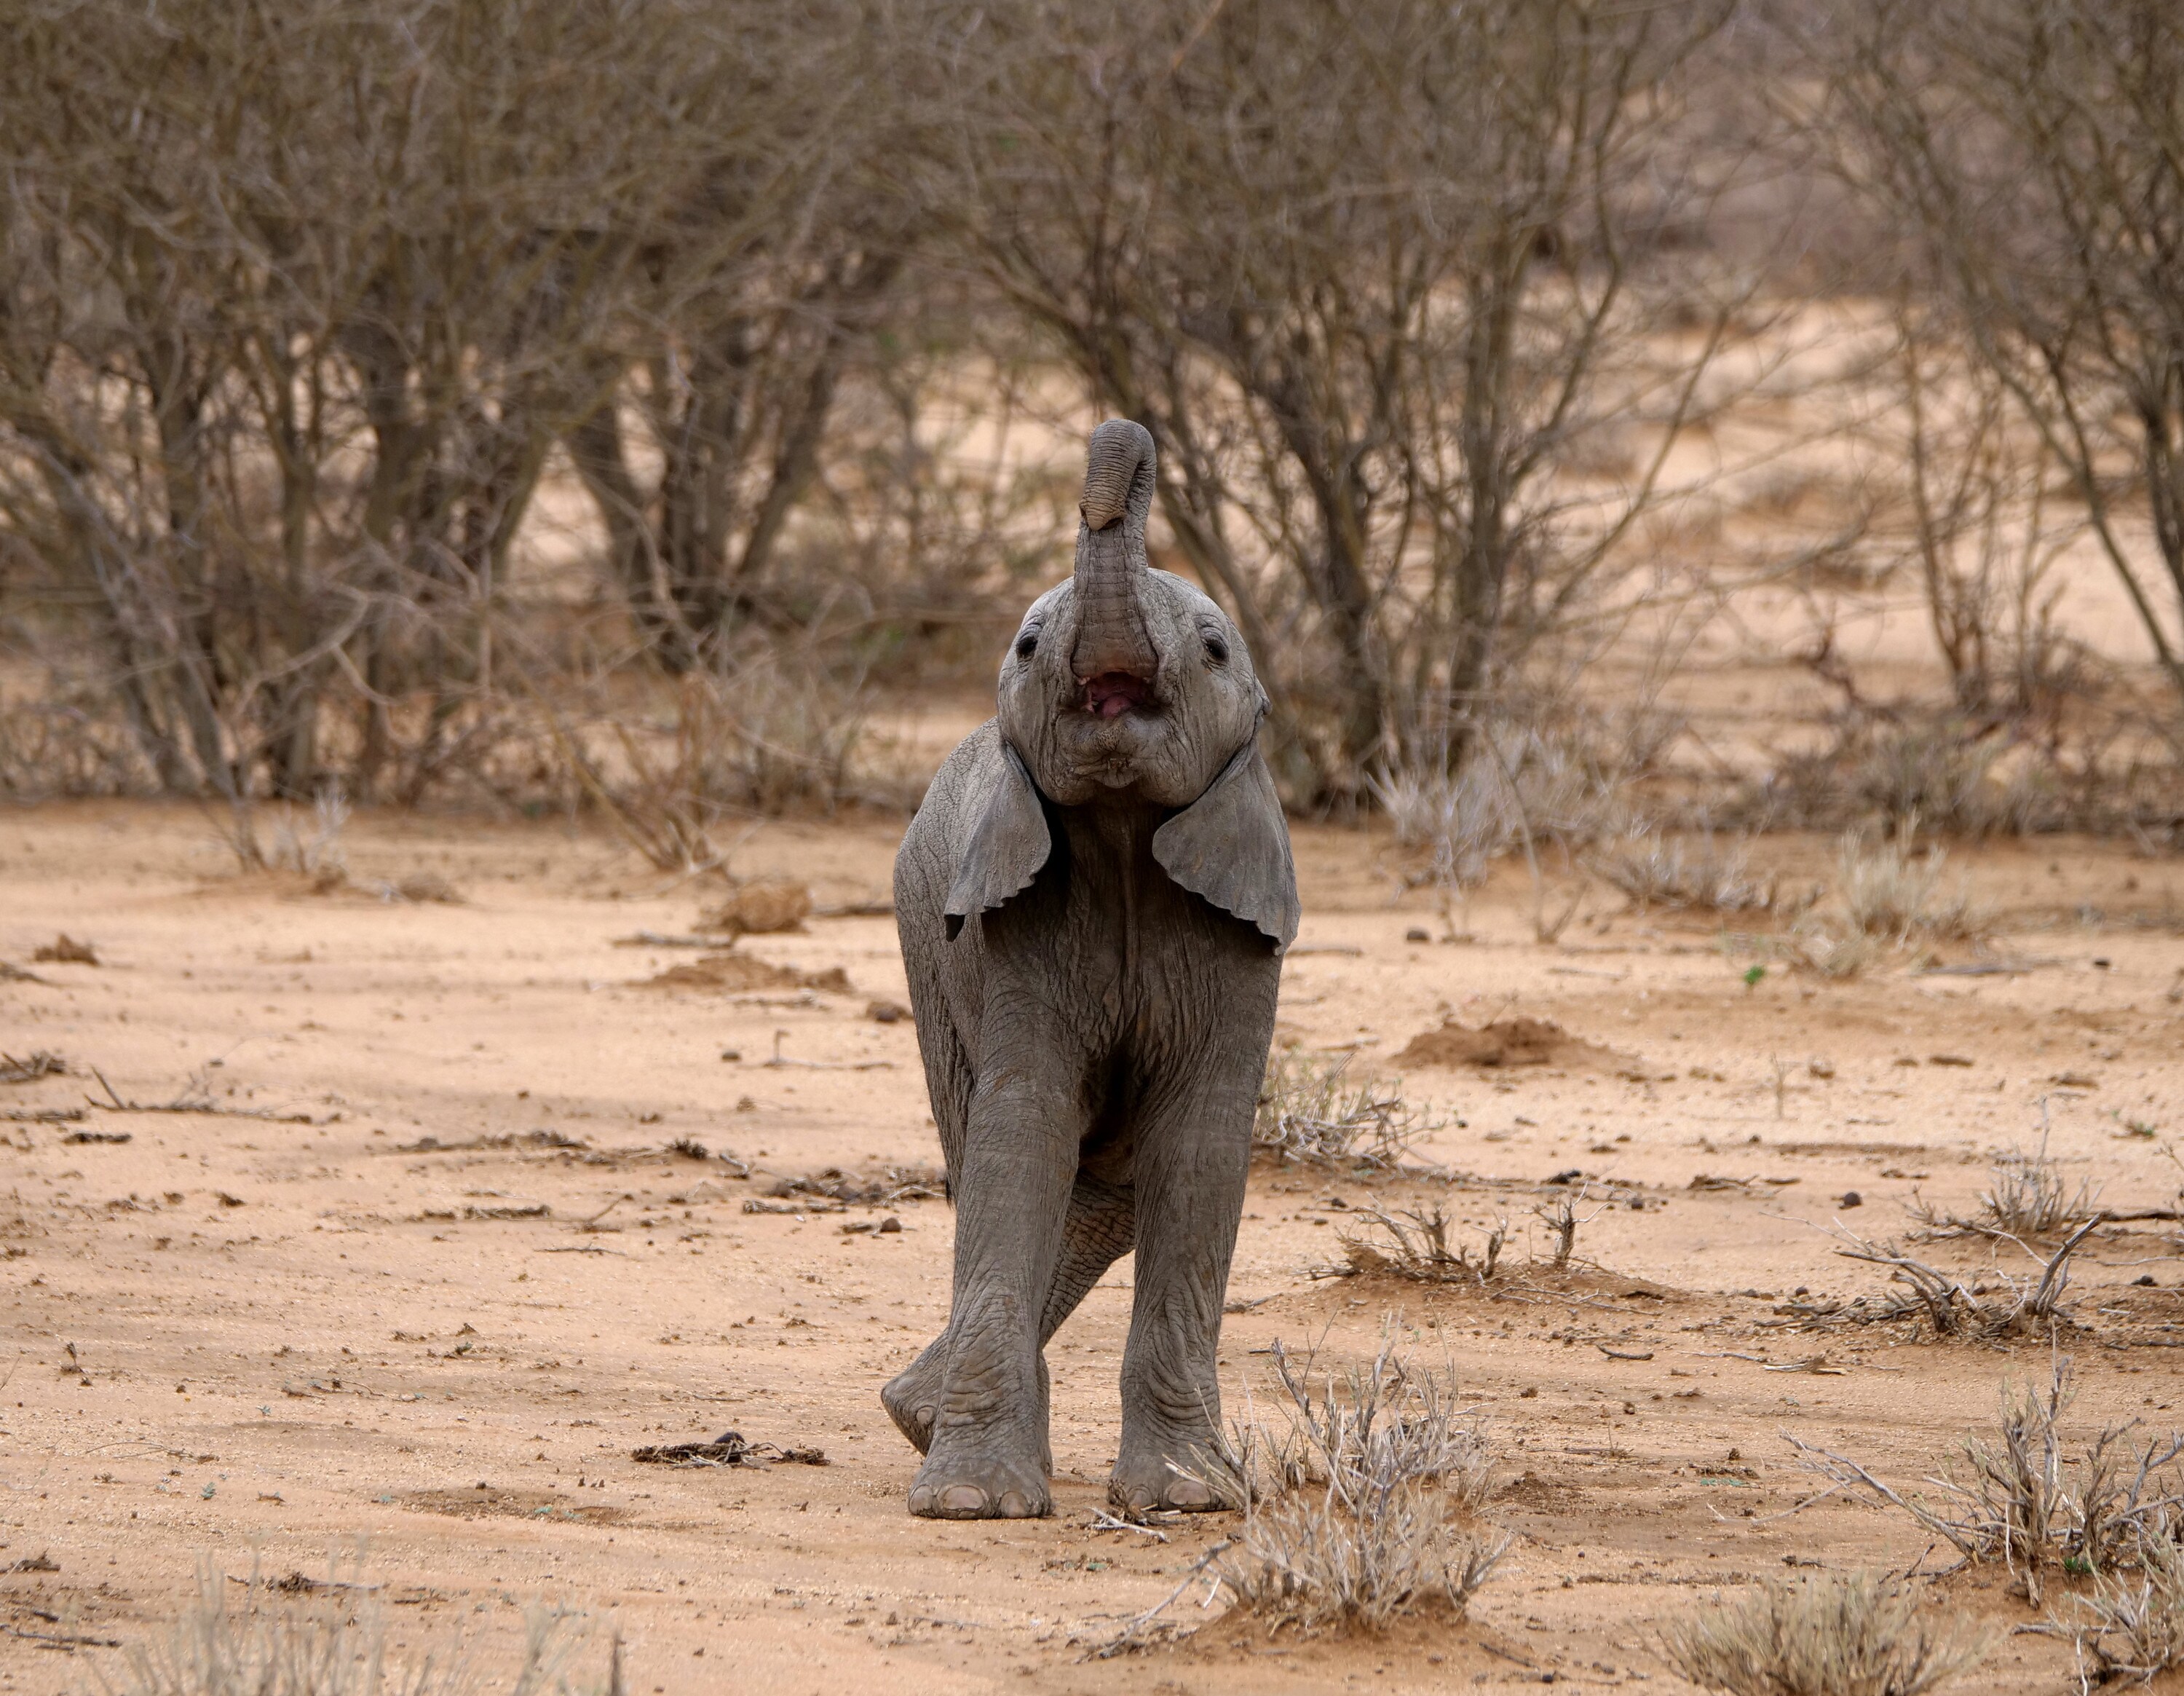 Max raises his trunk. (National Geographic for Disney+/Melanie Gerry)